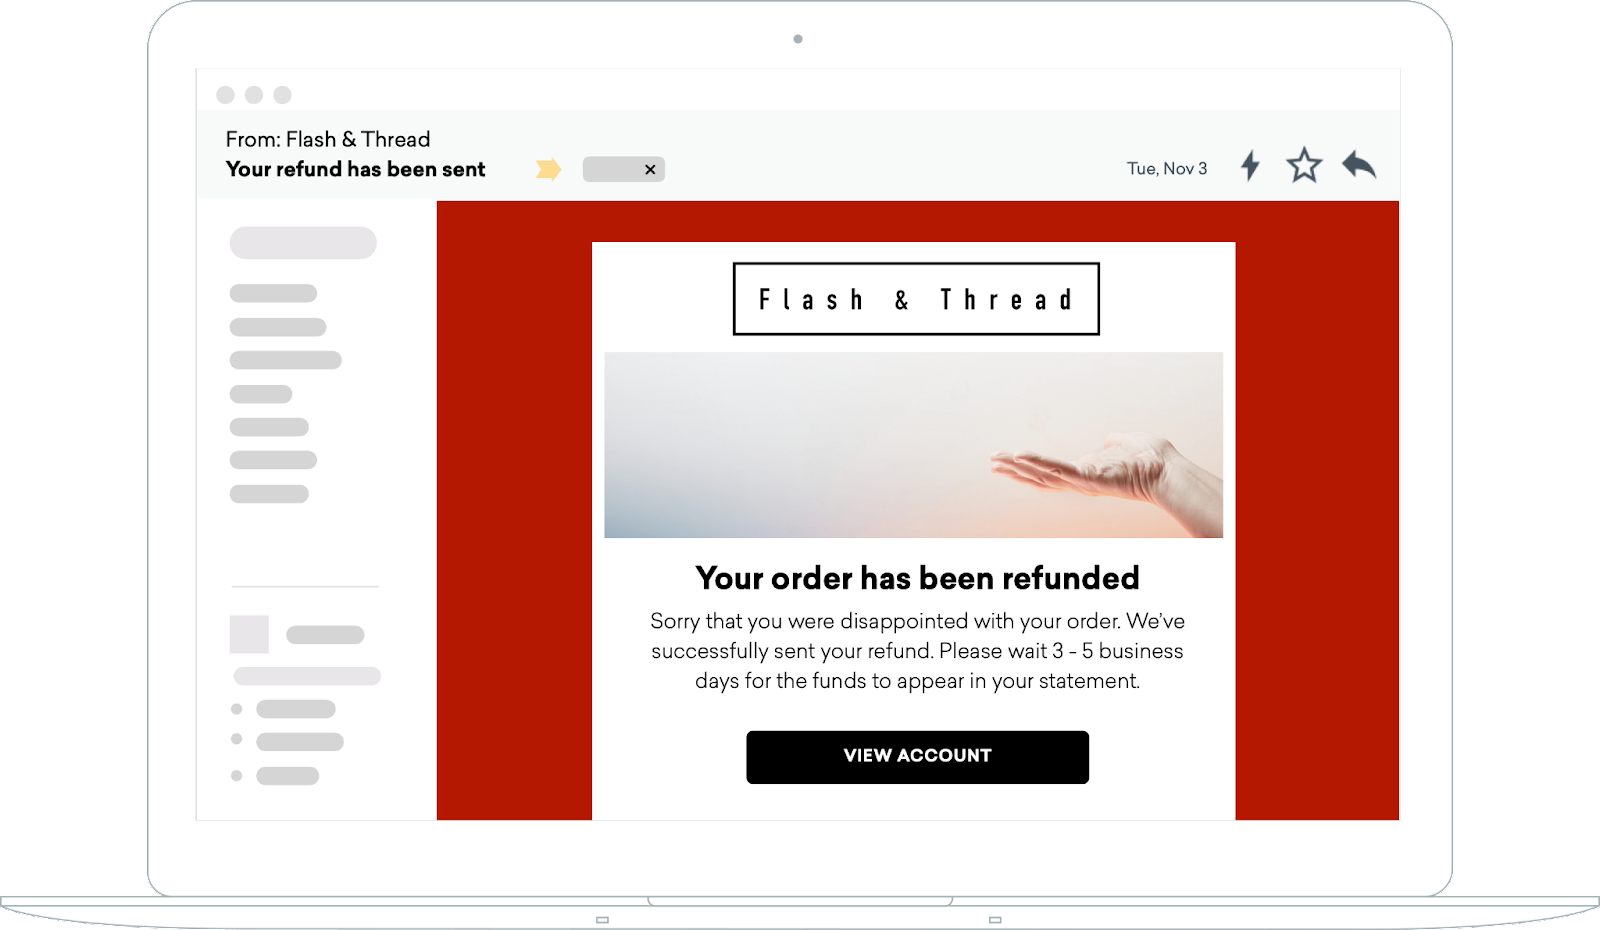 Email with the text "Your order has been refunded, Sorry that you were disappointed with your order. We've successfully sent your refund. Please wait 3-5 business days for the funds to appear in your statement" and a "View Account" button.